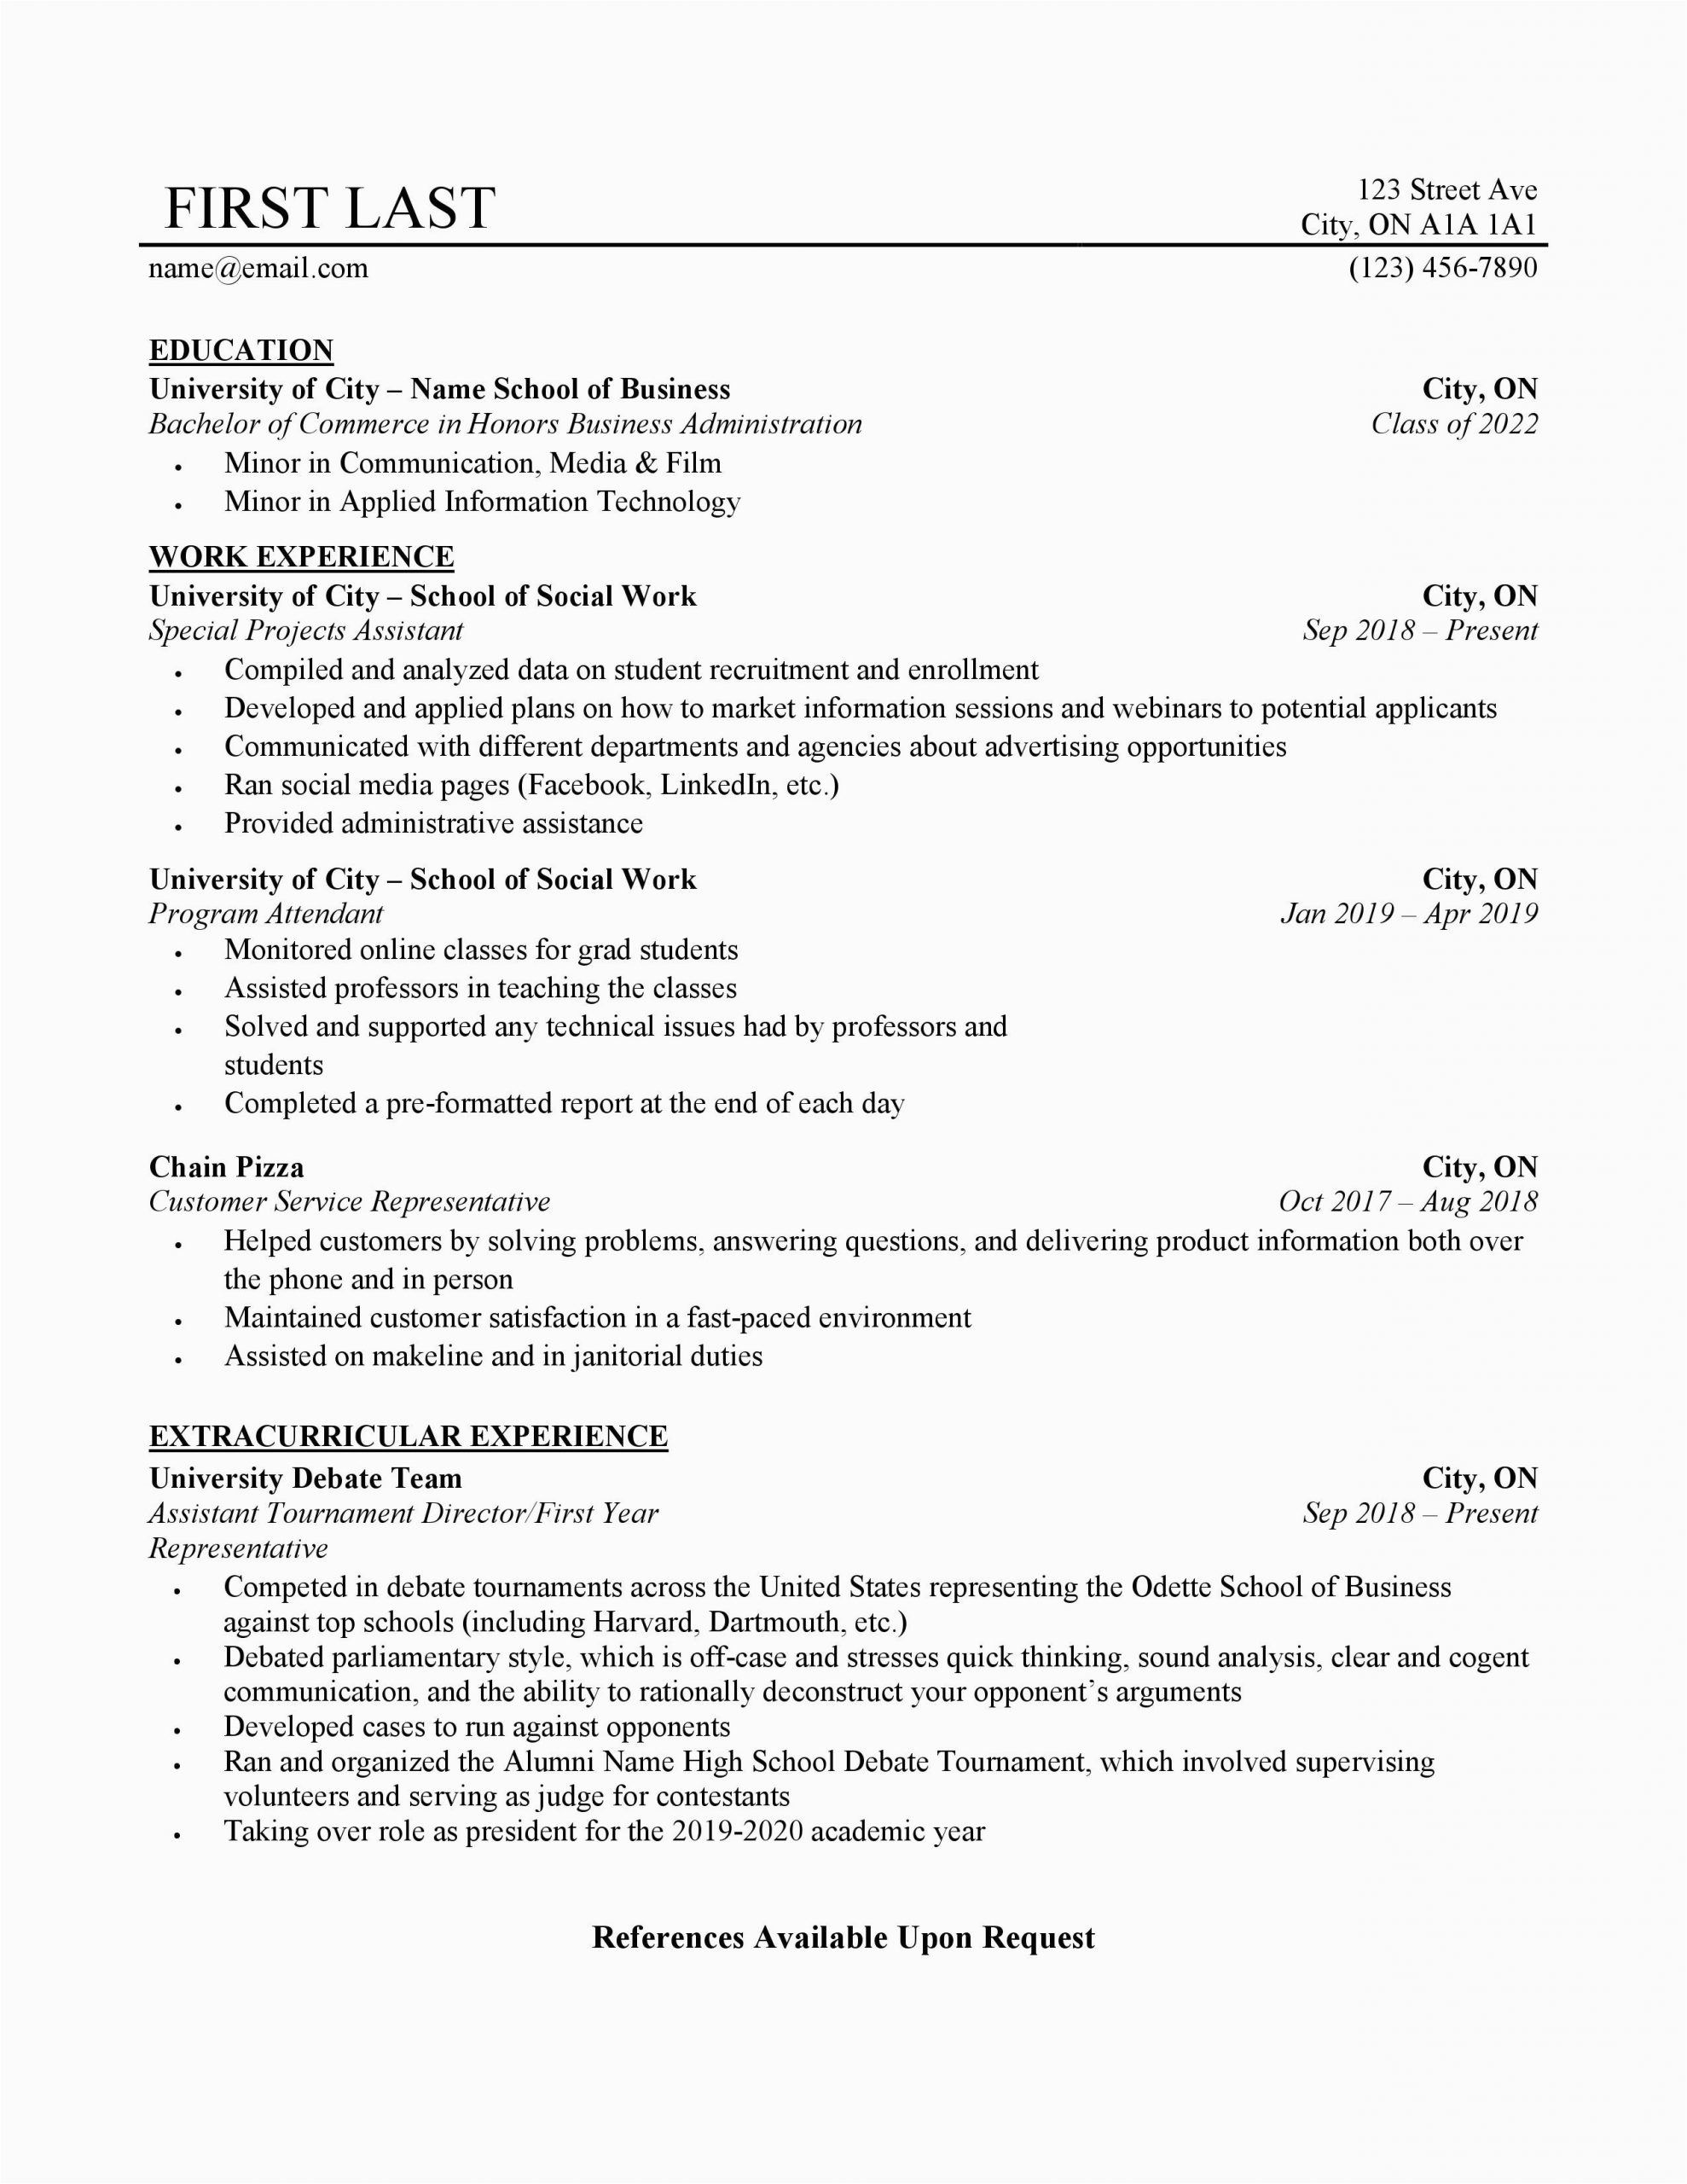 Resume for Part Time Job Student Sample First Time Applicant First Job College Student Resume